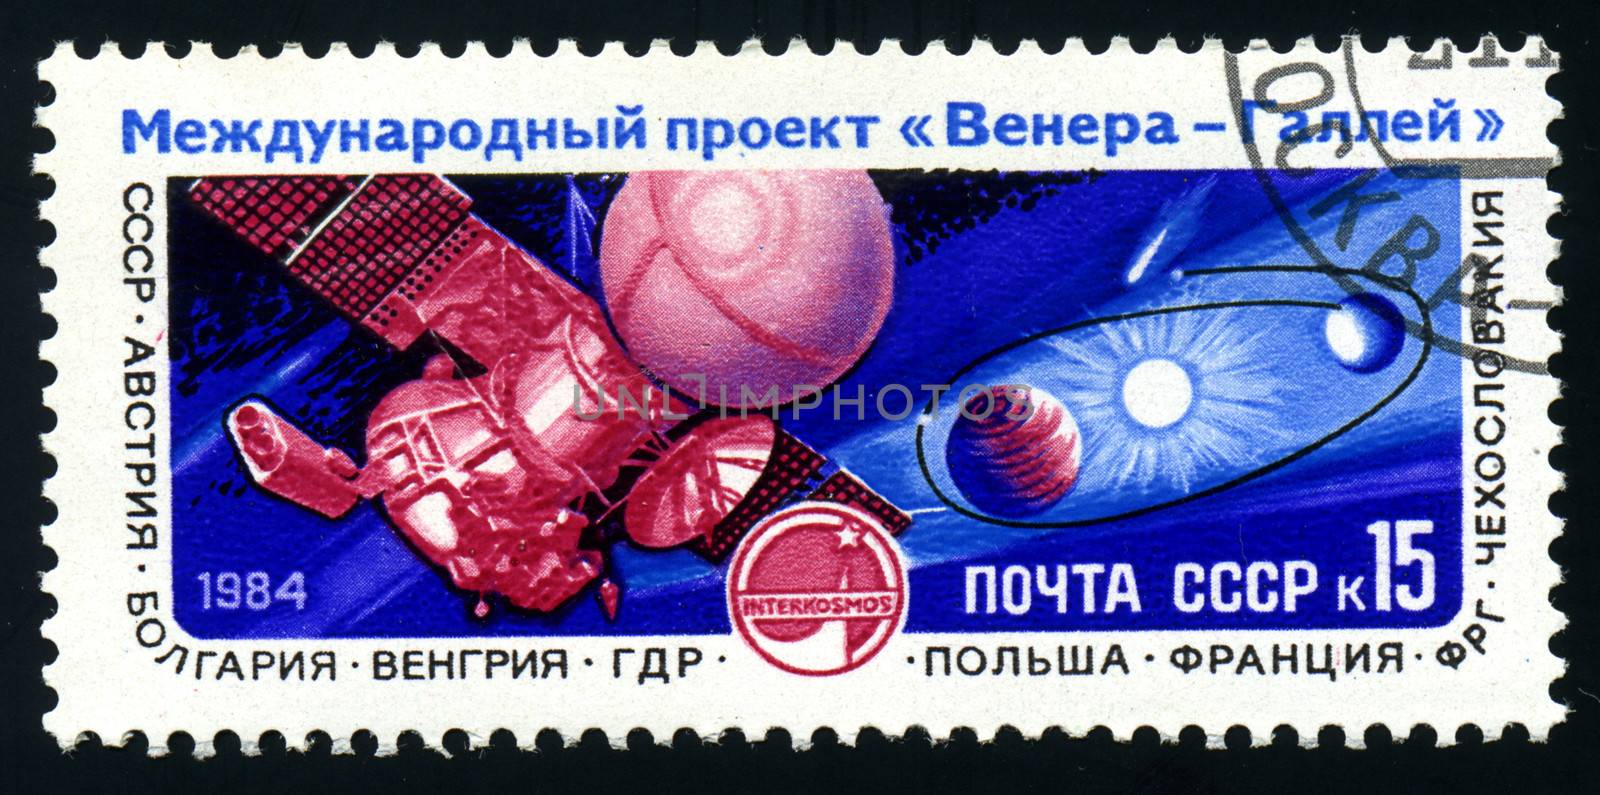 USSR - CIRCA 1985: An airmail stamp printed in USSR shows a space ship, series, circa 1985.